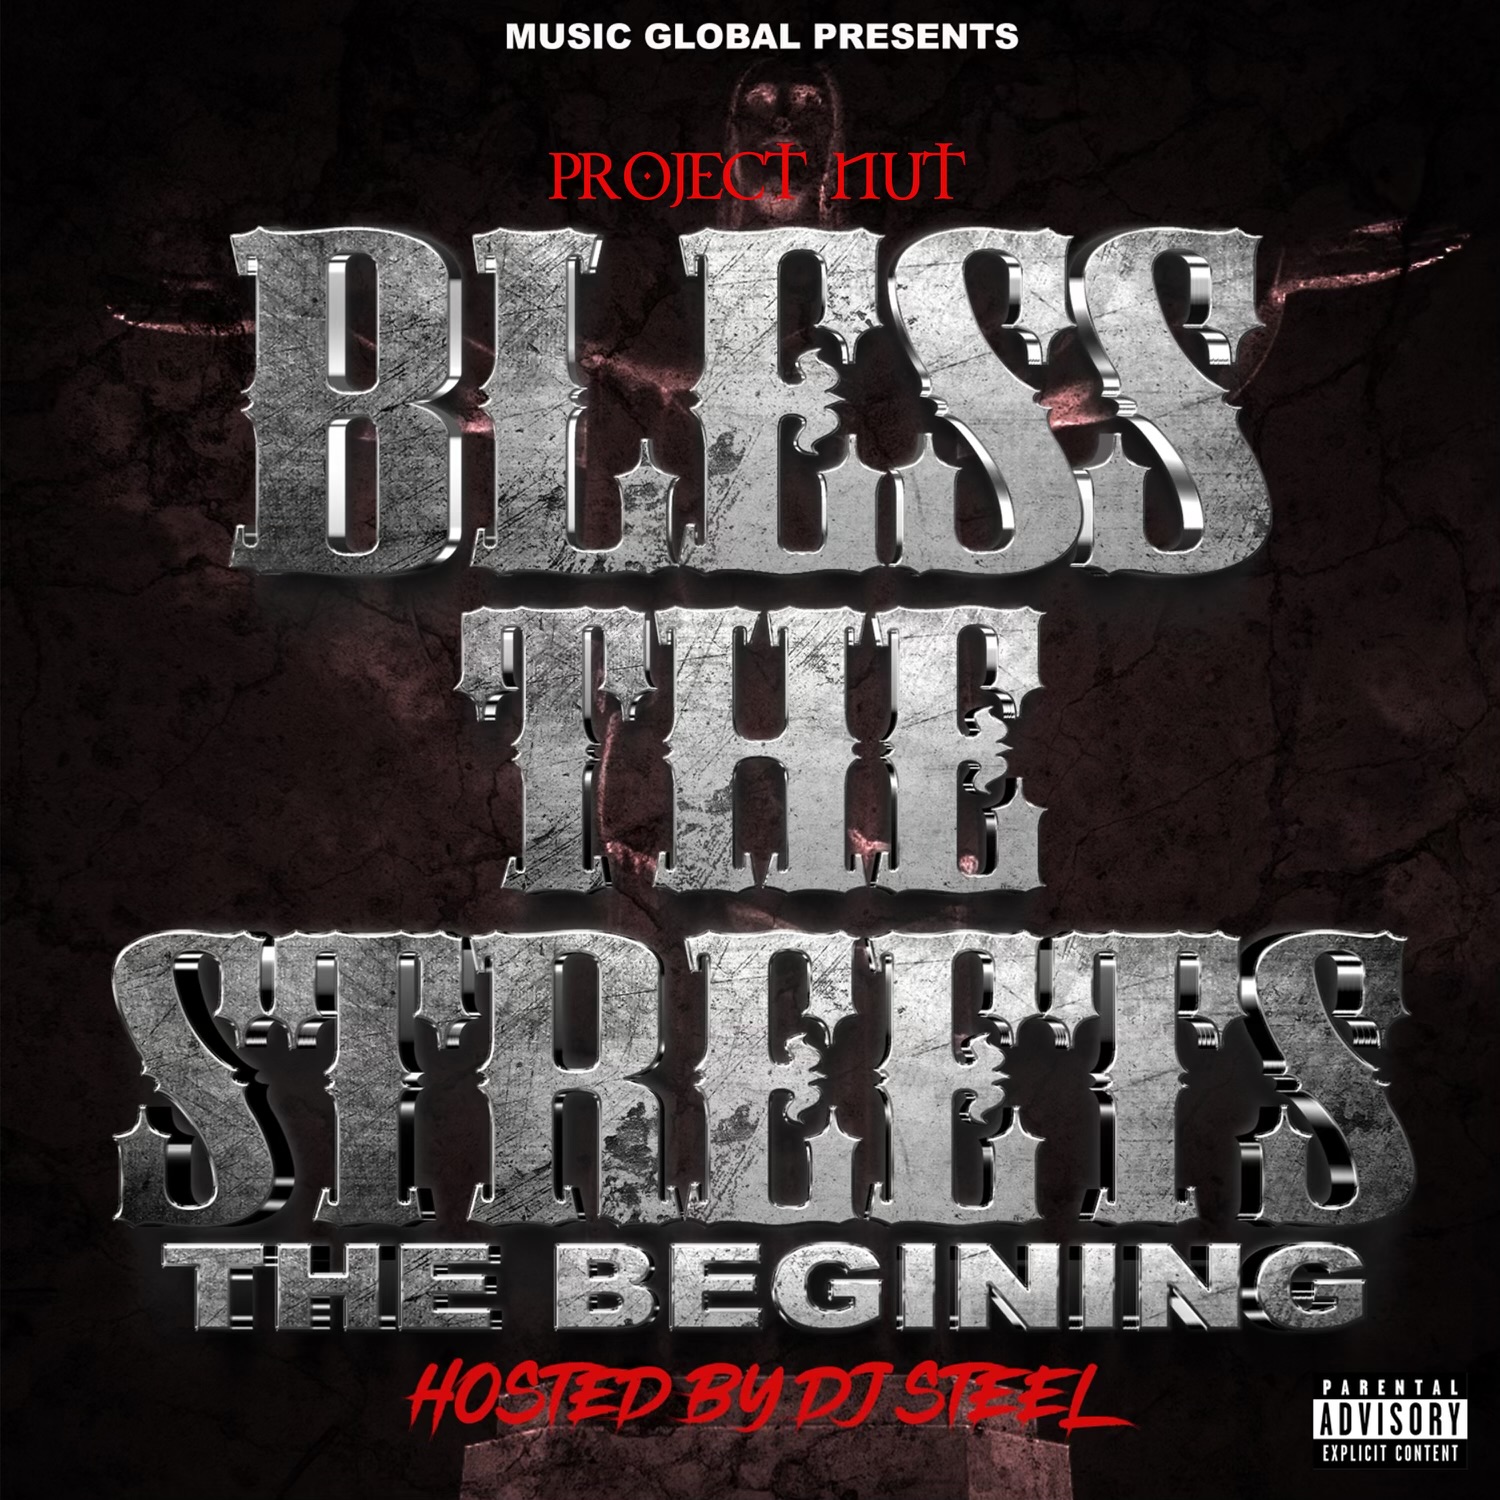 Project Nut - Bless The Streets (The Begining) Cover Art